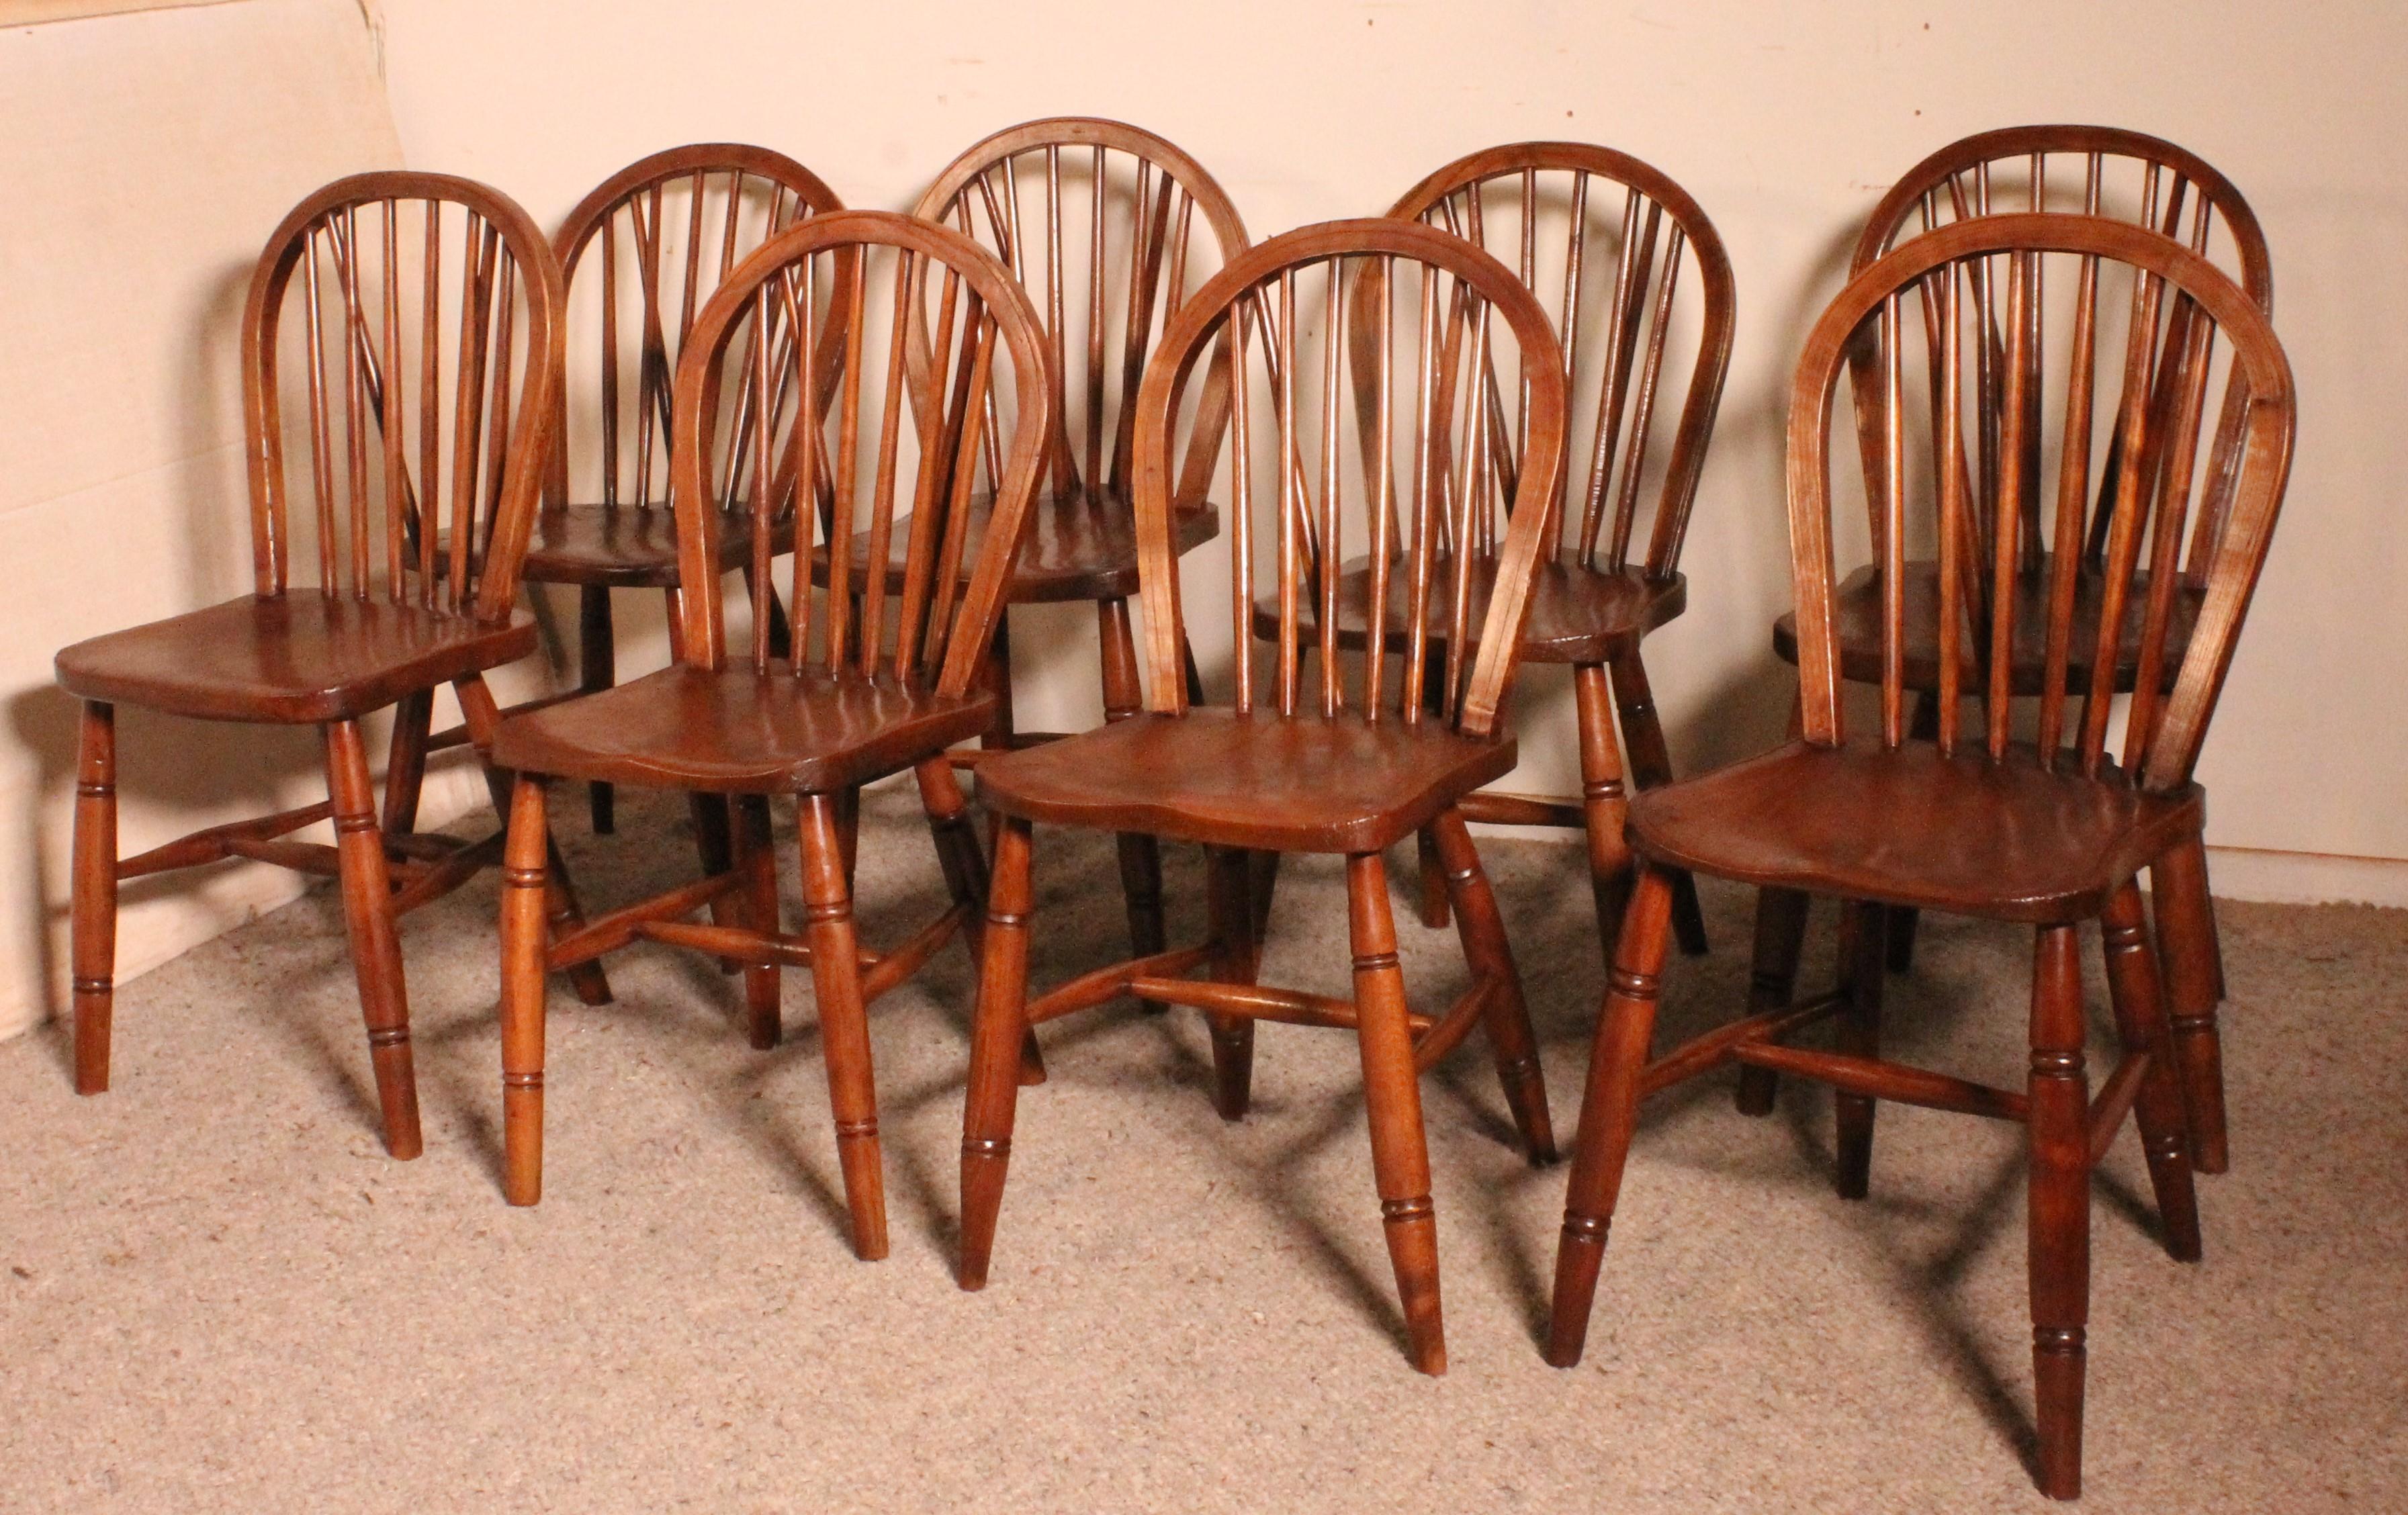 A fine set of 8 chestnut windsor chairs from the 19th century-England

Very nice set which stands out for its good quality and number. It is unusual to find a set of 8 windsor chairs
Very nice patina and in very good condition
The chairs are